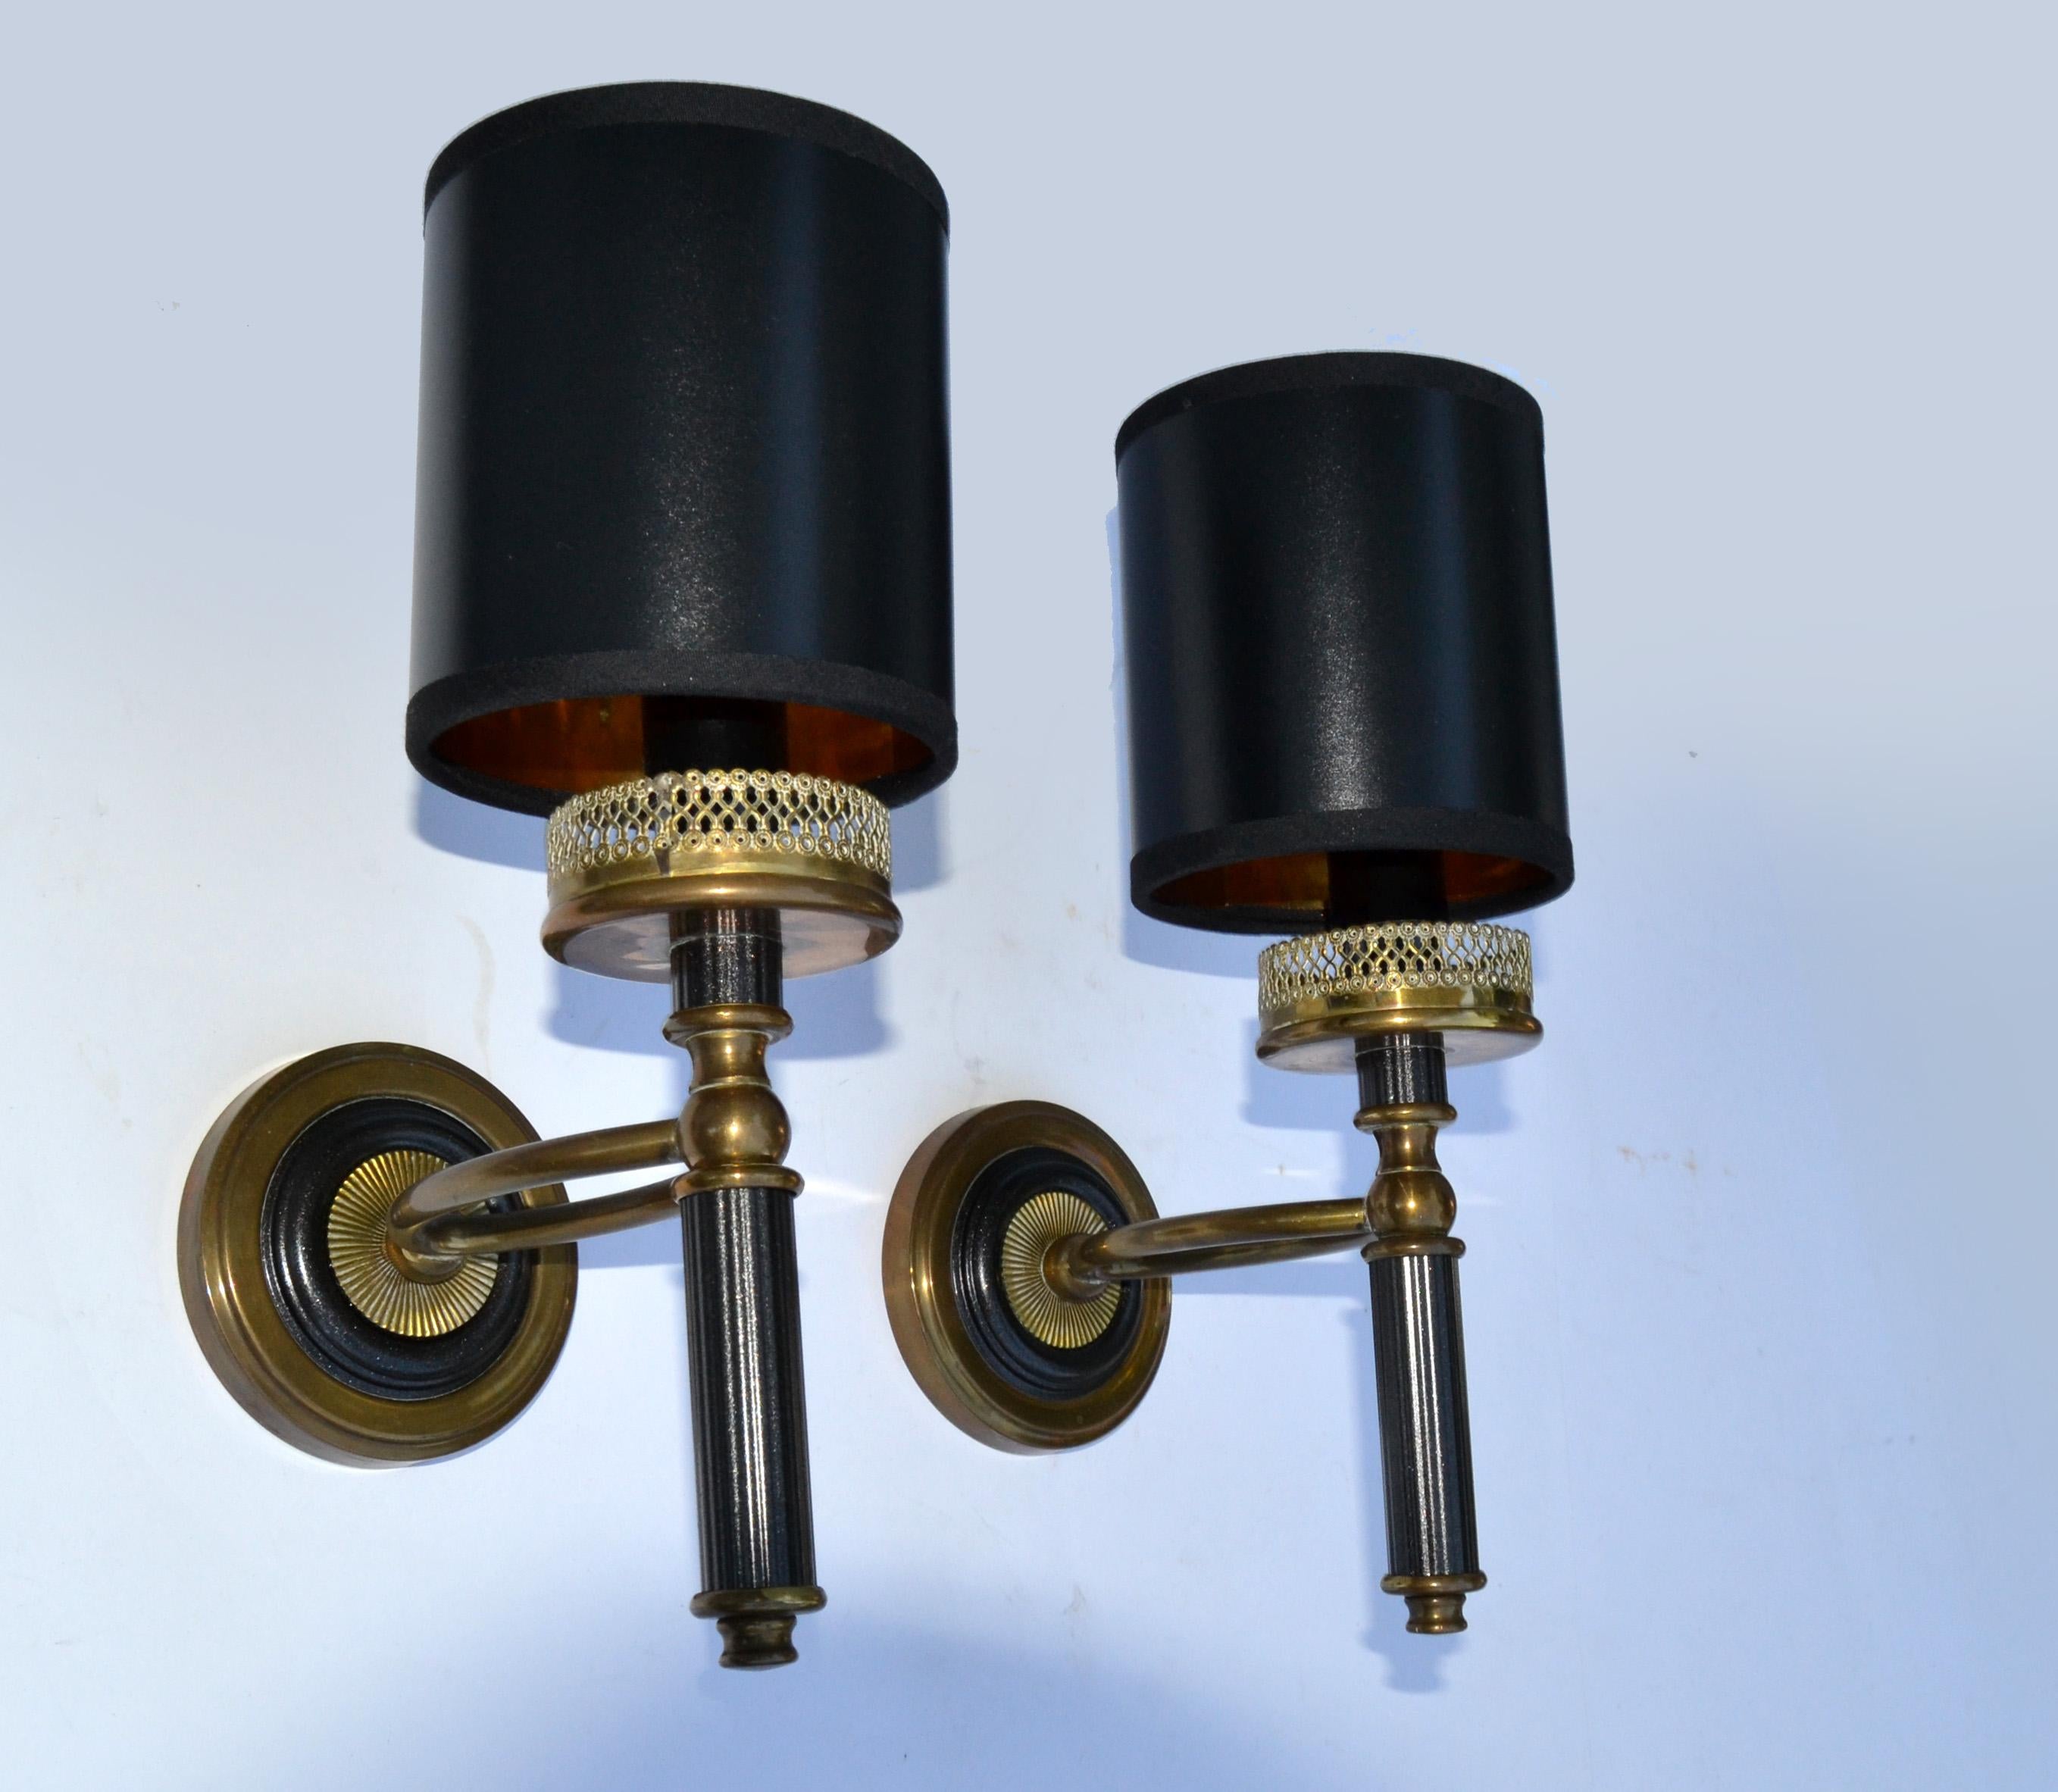 Paper Maison Lunel French Art Deco Two Patina Brass and Gun Metal Wall Sconces, Pair For Sale